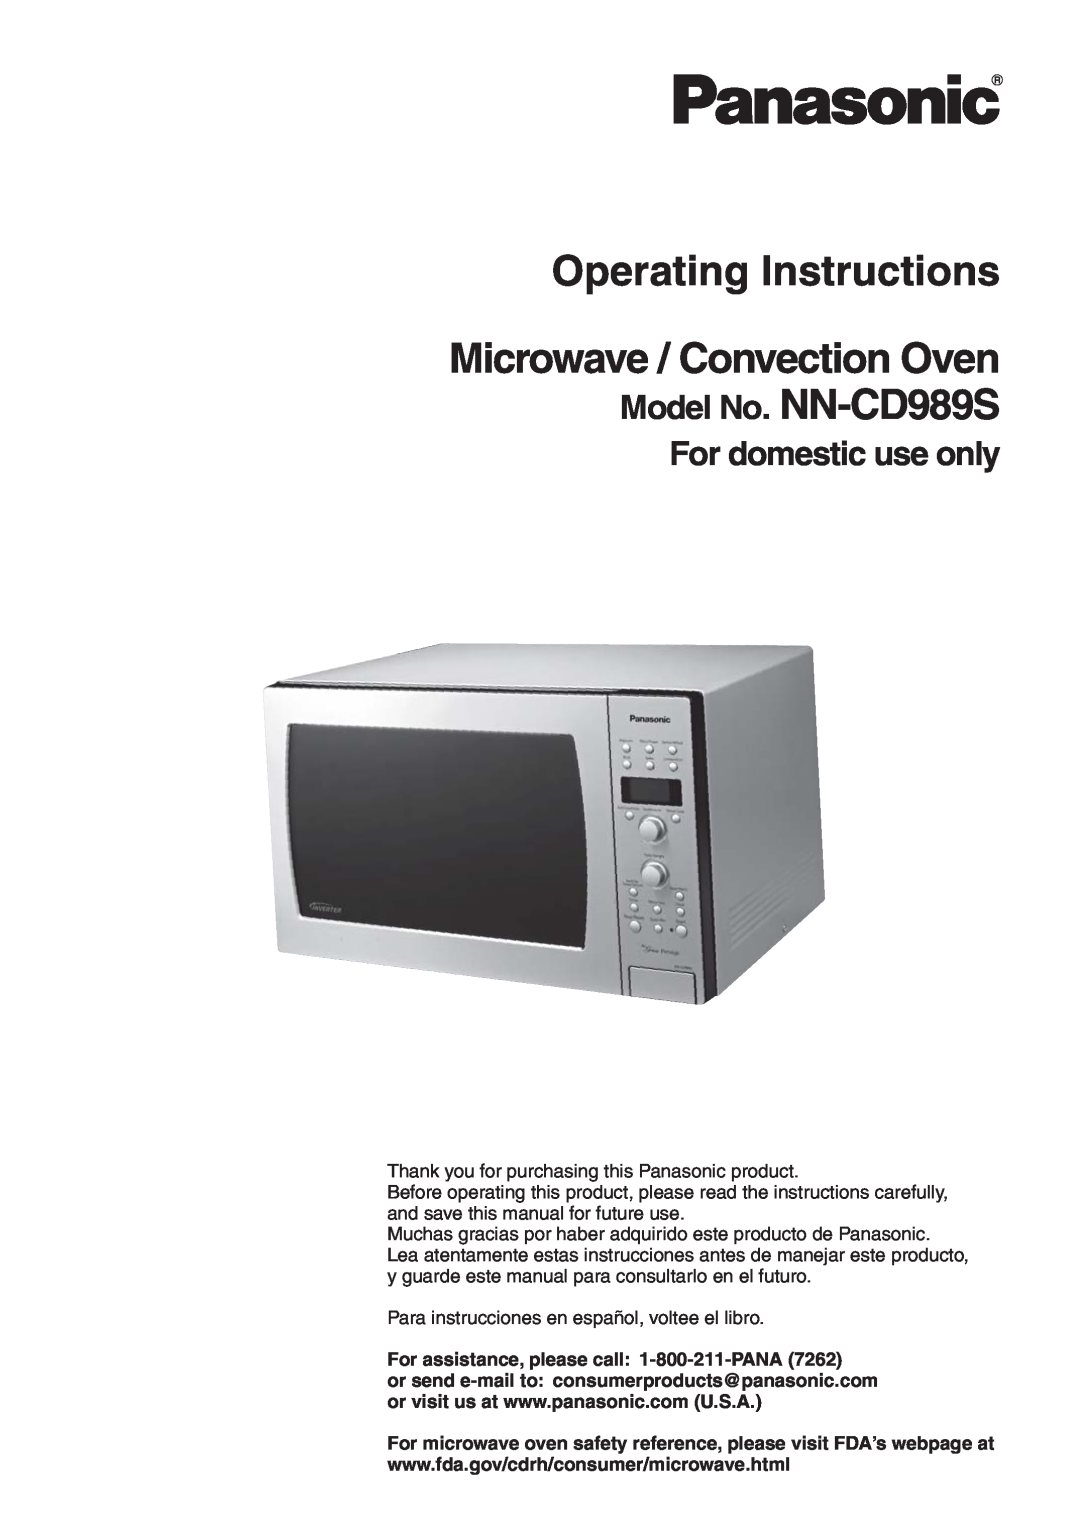 Panasonic manual Operating Instructions, For domestic use only, Microwave / Convection Oven Model No. NN-CD989S 